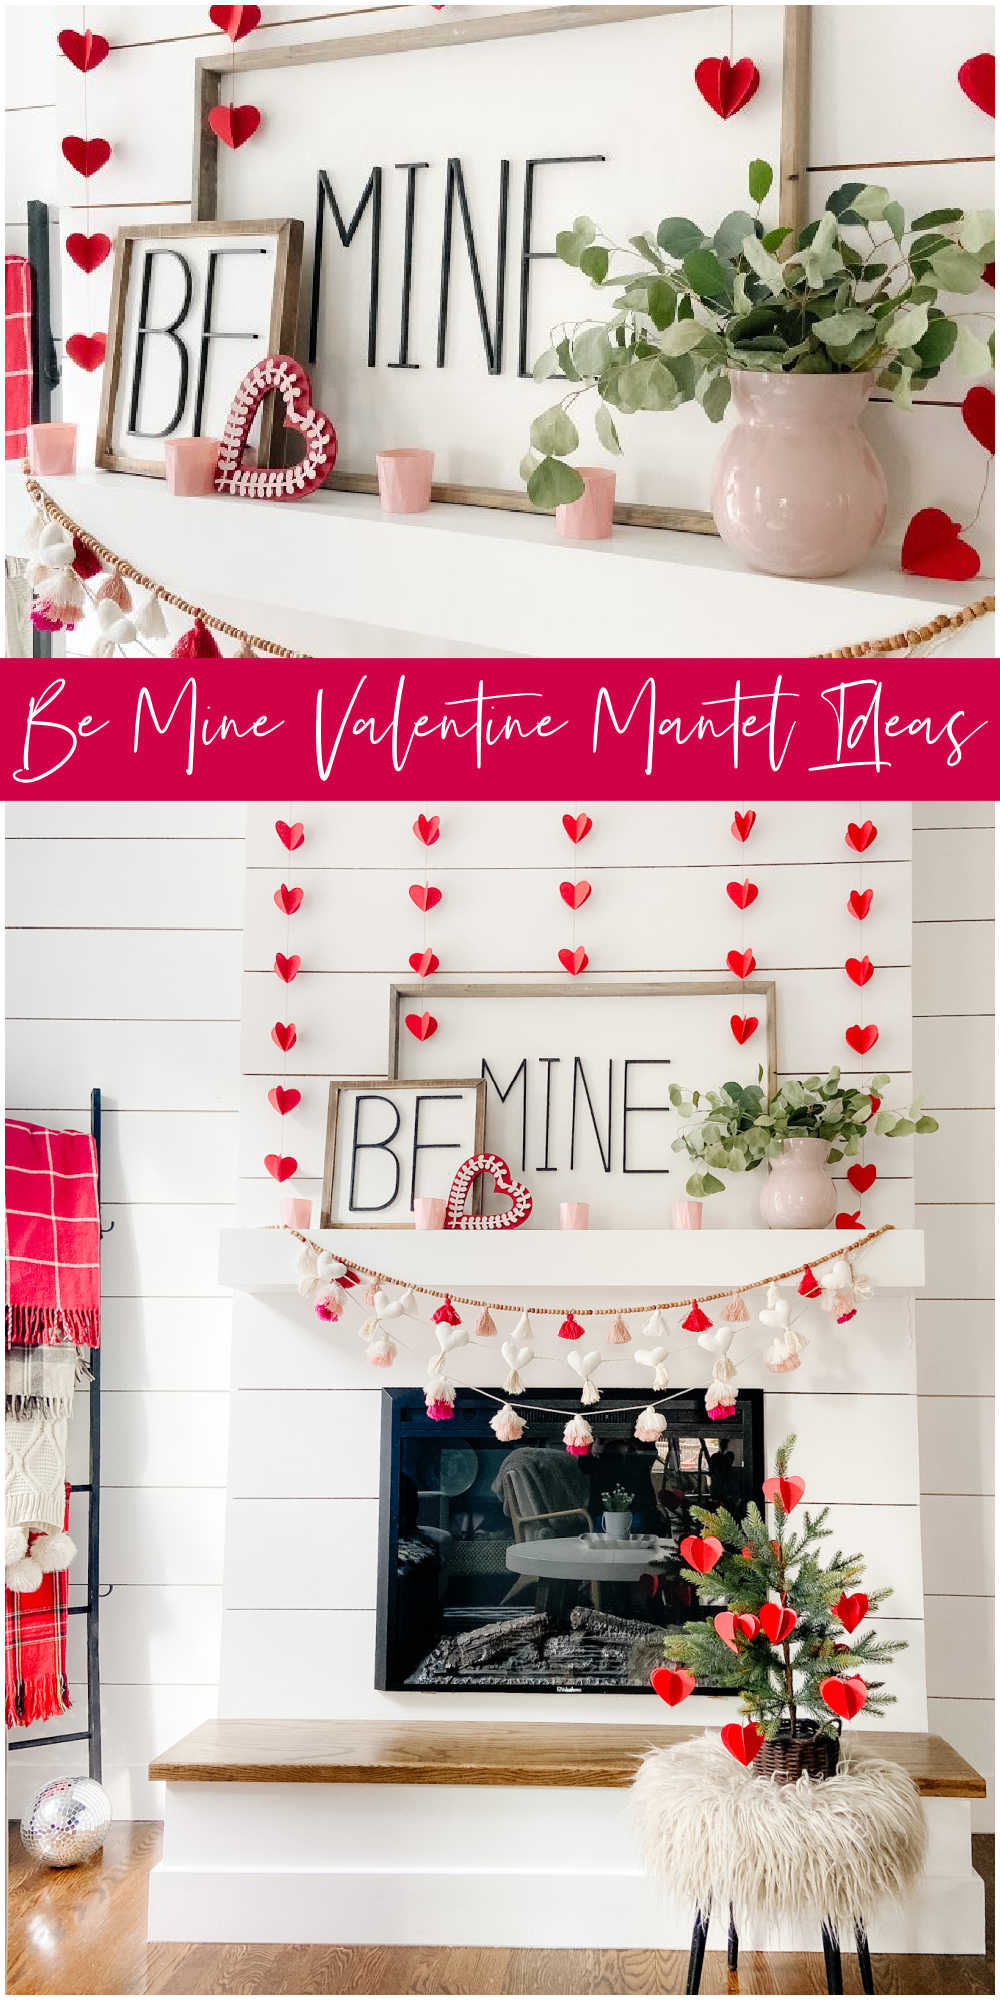 Be Mine Valentine Mantel Ideas. Create some DIY Valentine's signs, hang festive banners two ways and add hearts to a tree for colorful Valentine's Day decor!